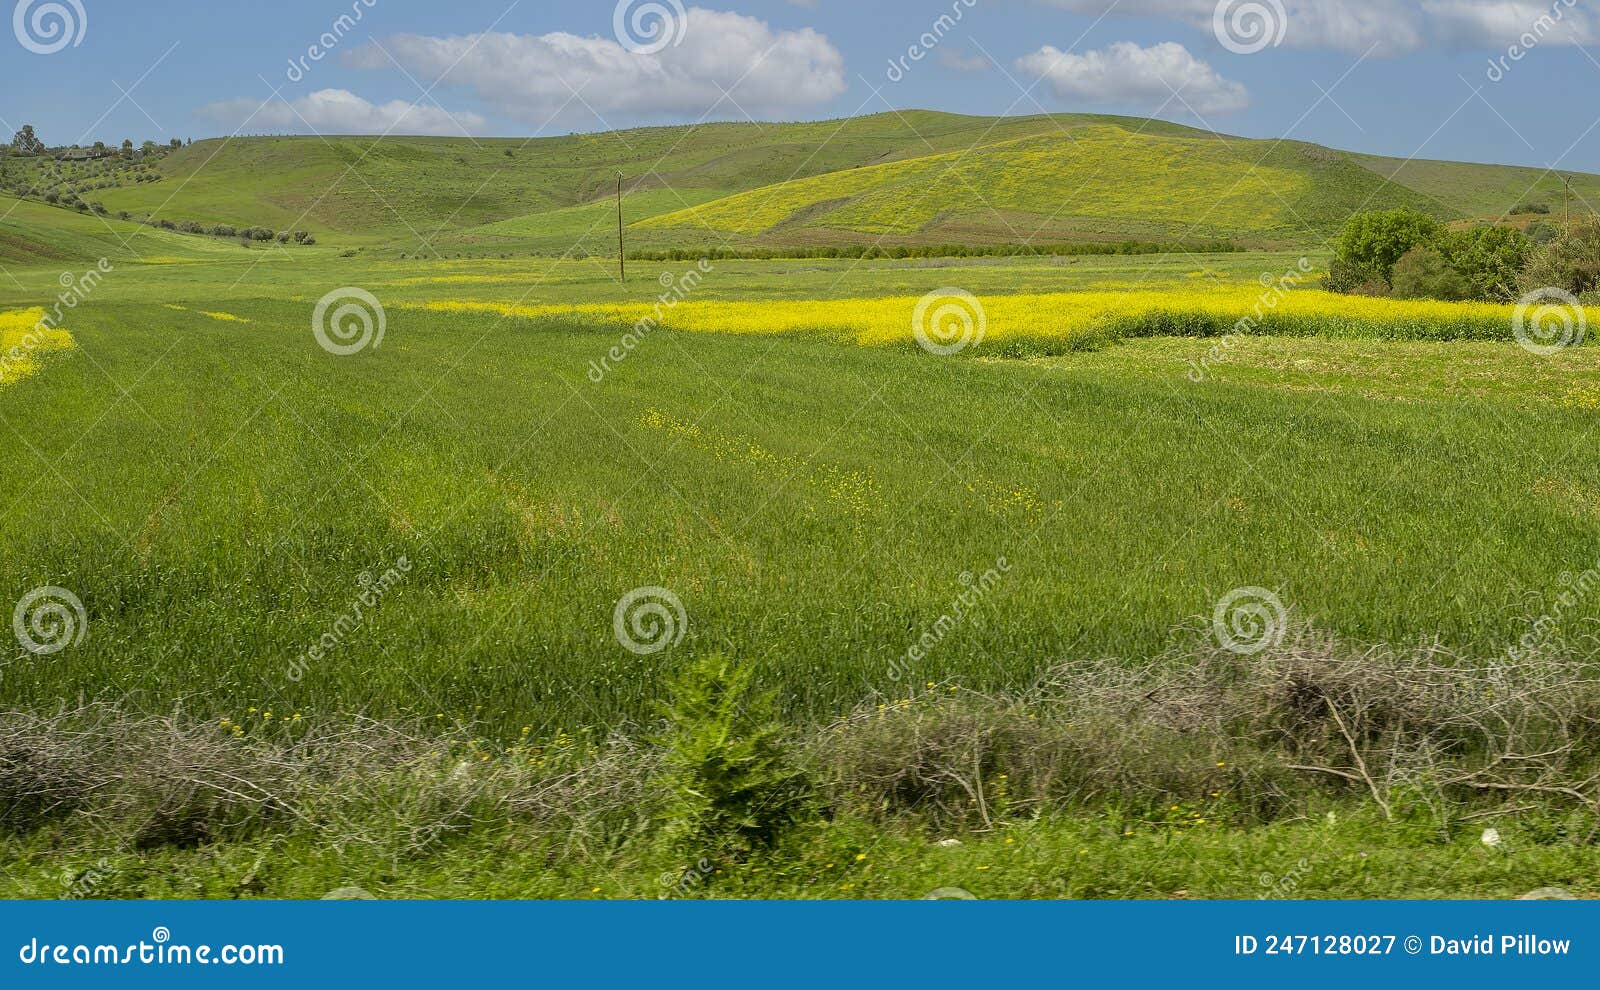 fields of mustard plants and wheat alongside the road in morocco.